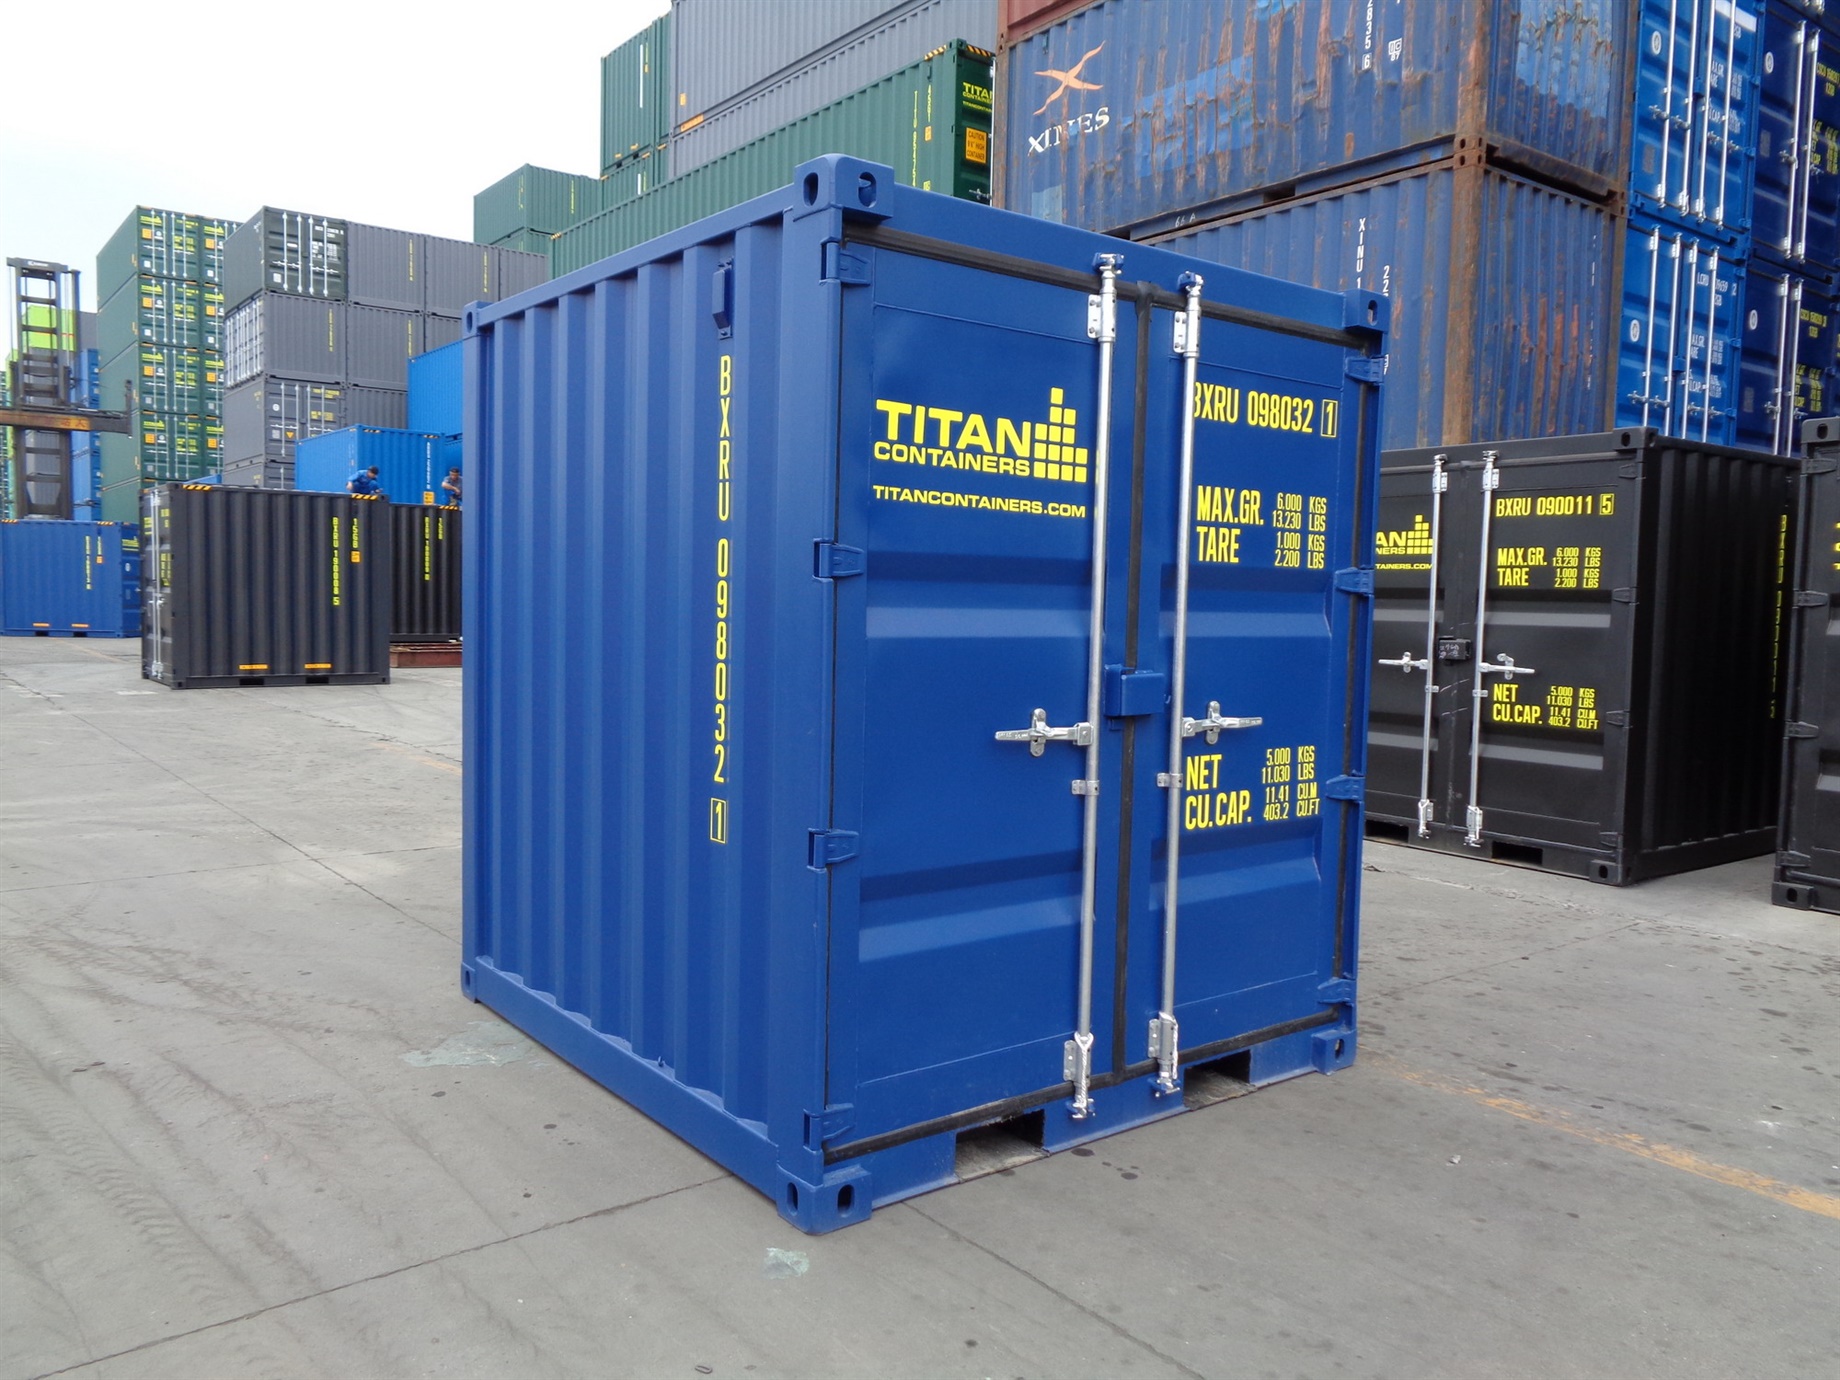 https://titancontainers.cz/hs-fs/hubfs/Containers/Small%20Containers/6%208%2010%20blue%20doors%20closed%20foot%20storage%20container%20TITAN%20Shiipping%20Containers.jpg?width=1840&height=1380&name=6%208%2010%20blue%20doors%20closed%20foot%20storage%20container%20TITAN%20Shiipping%20Containers.jpg